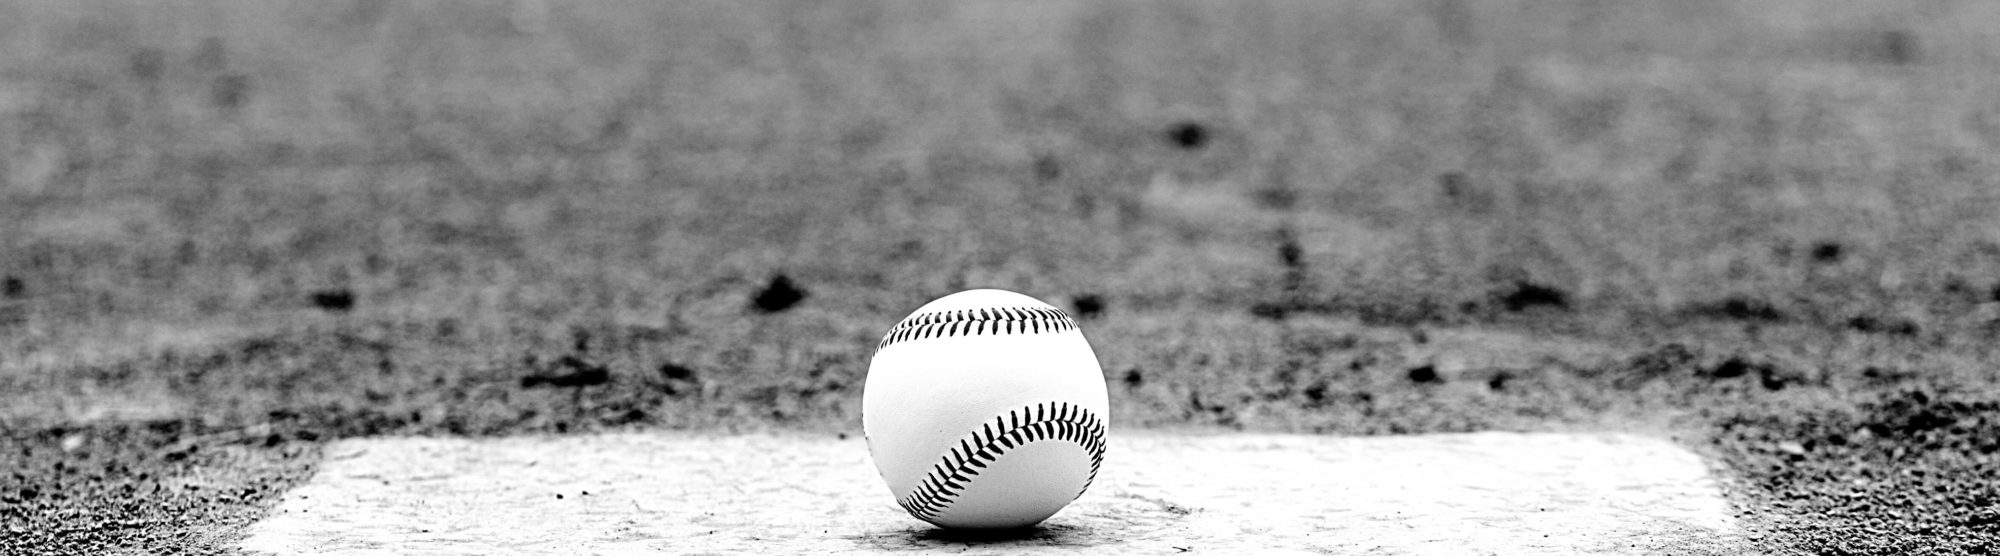 image of a baseball at the plate, waiting for someone to step up